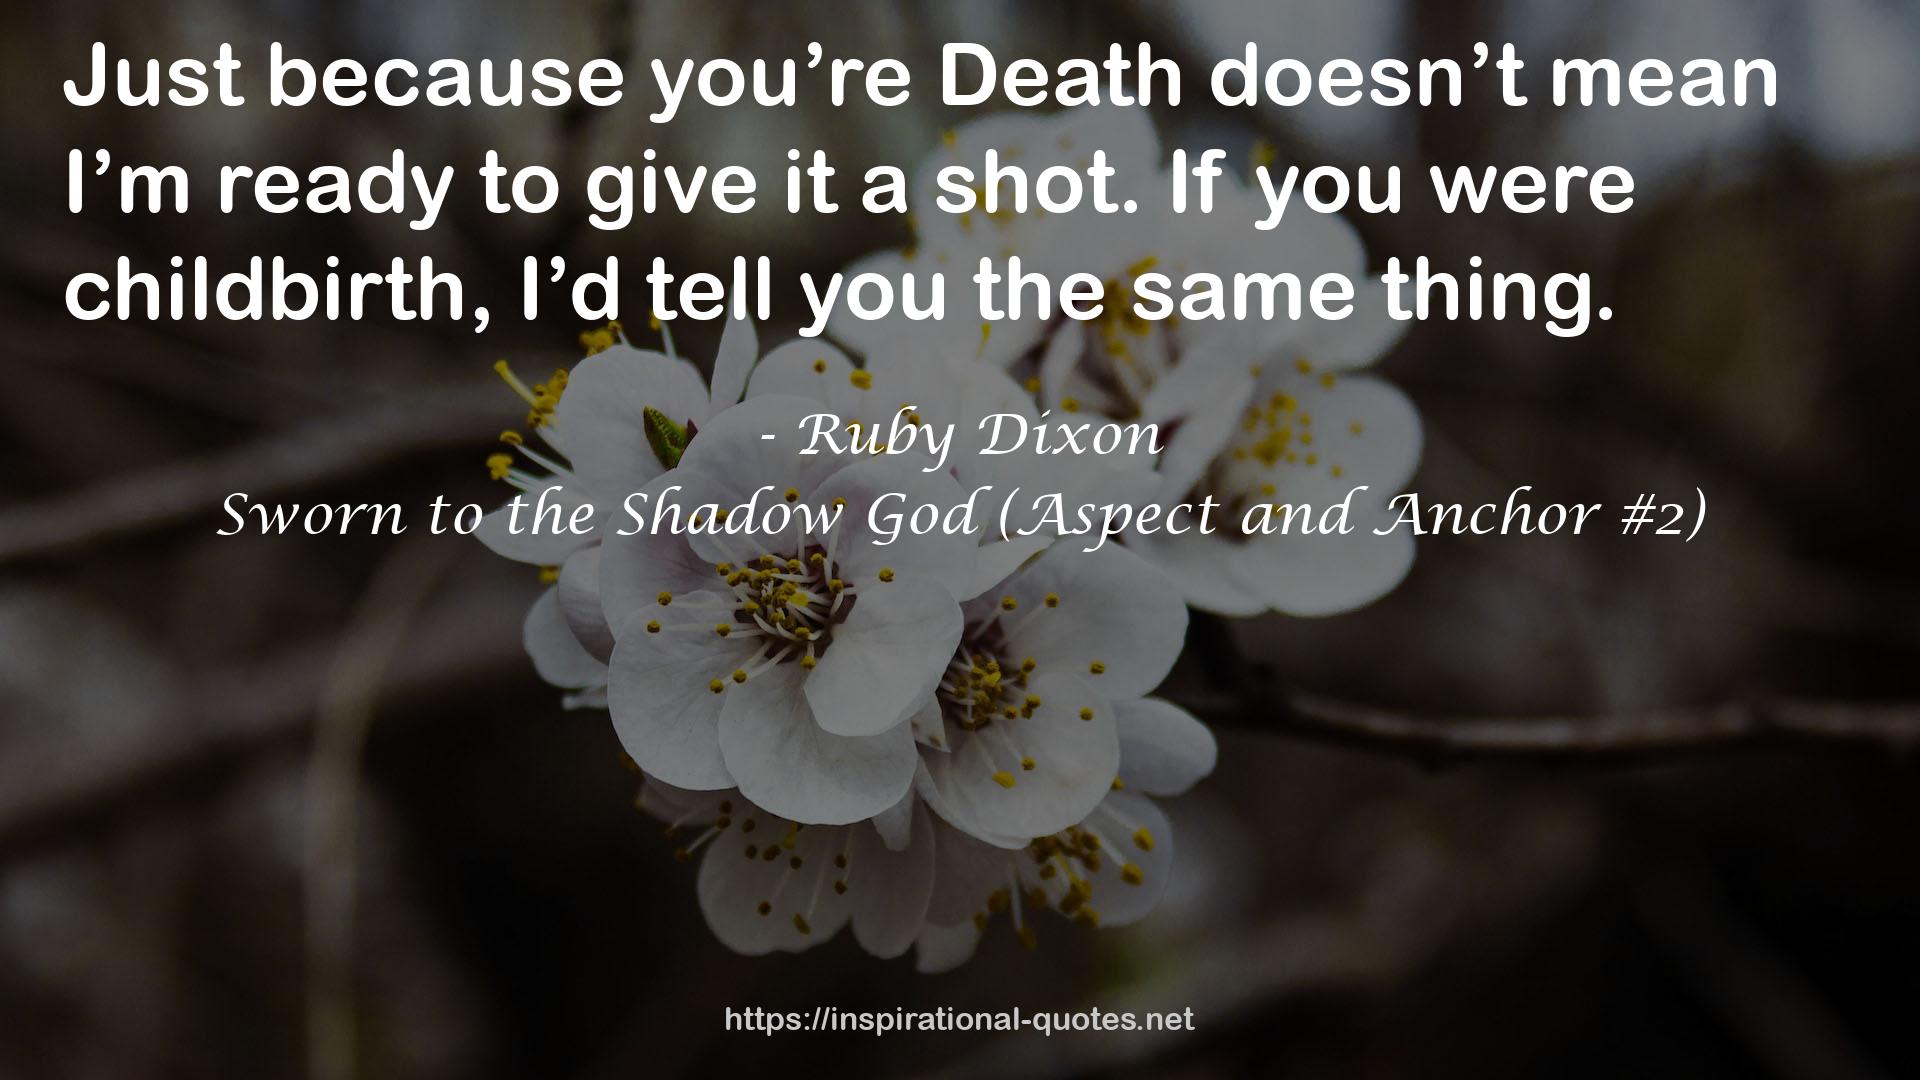 Sworn to the Shadow God (Aspect and Anchor #2) QUOTES